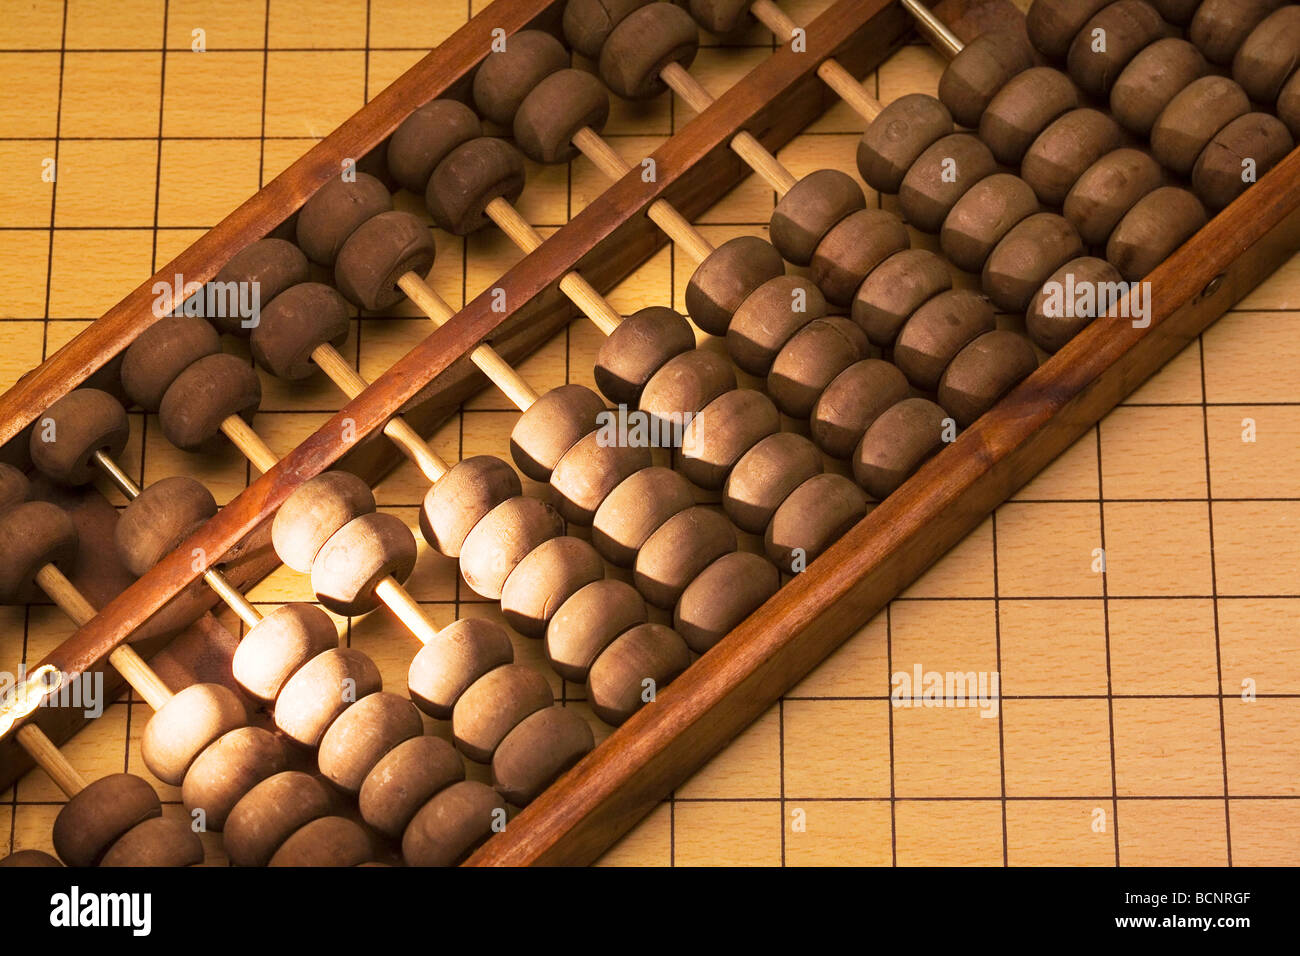 Chinese traditional calculator abacus lying on Weiqi game board Stock Photo